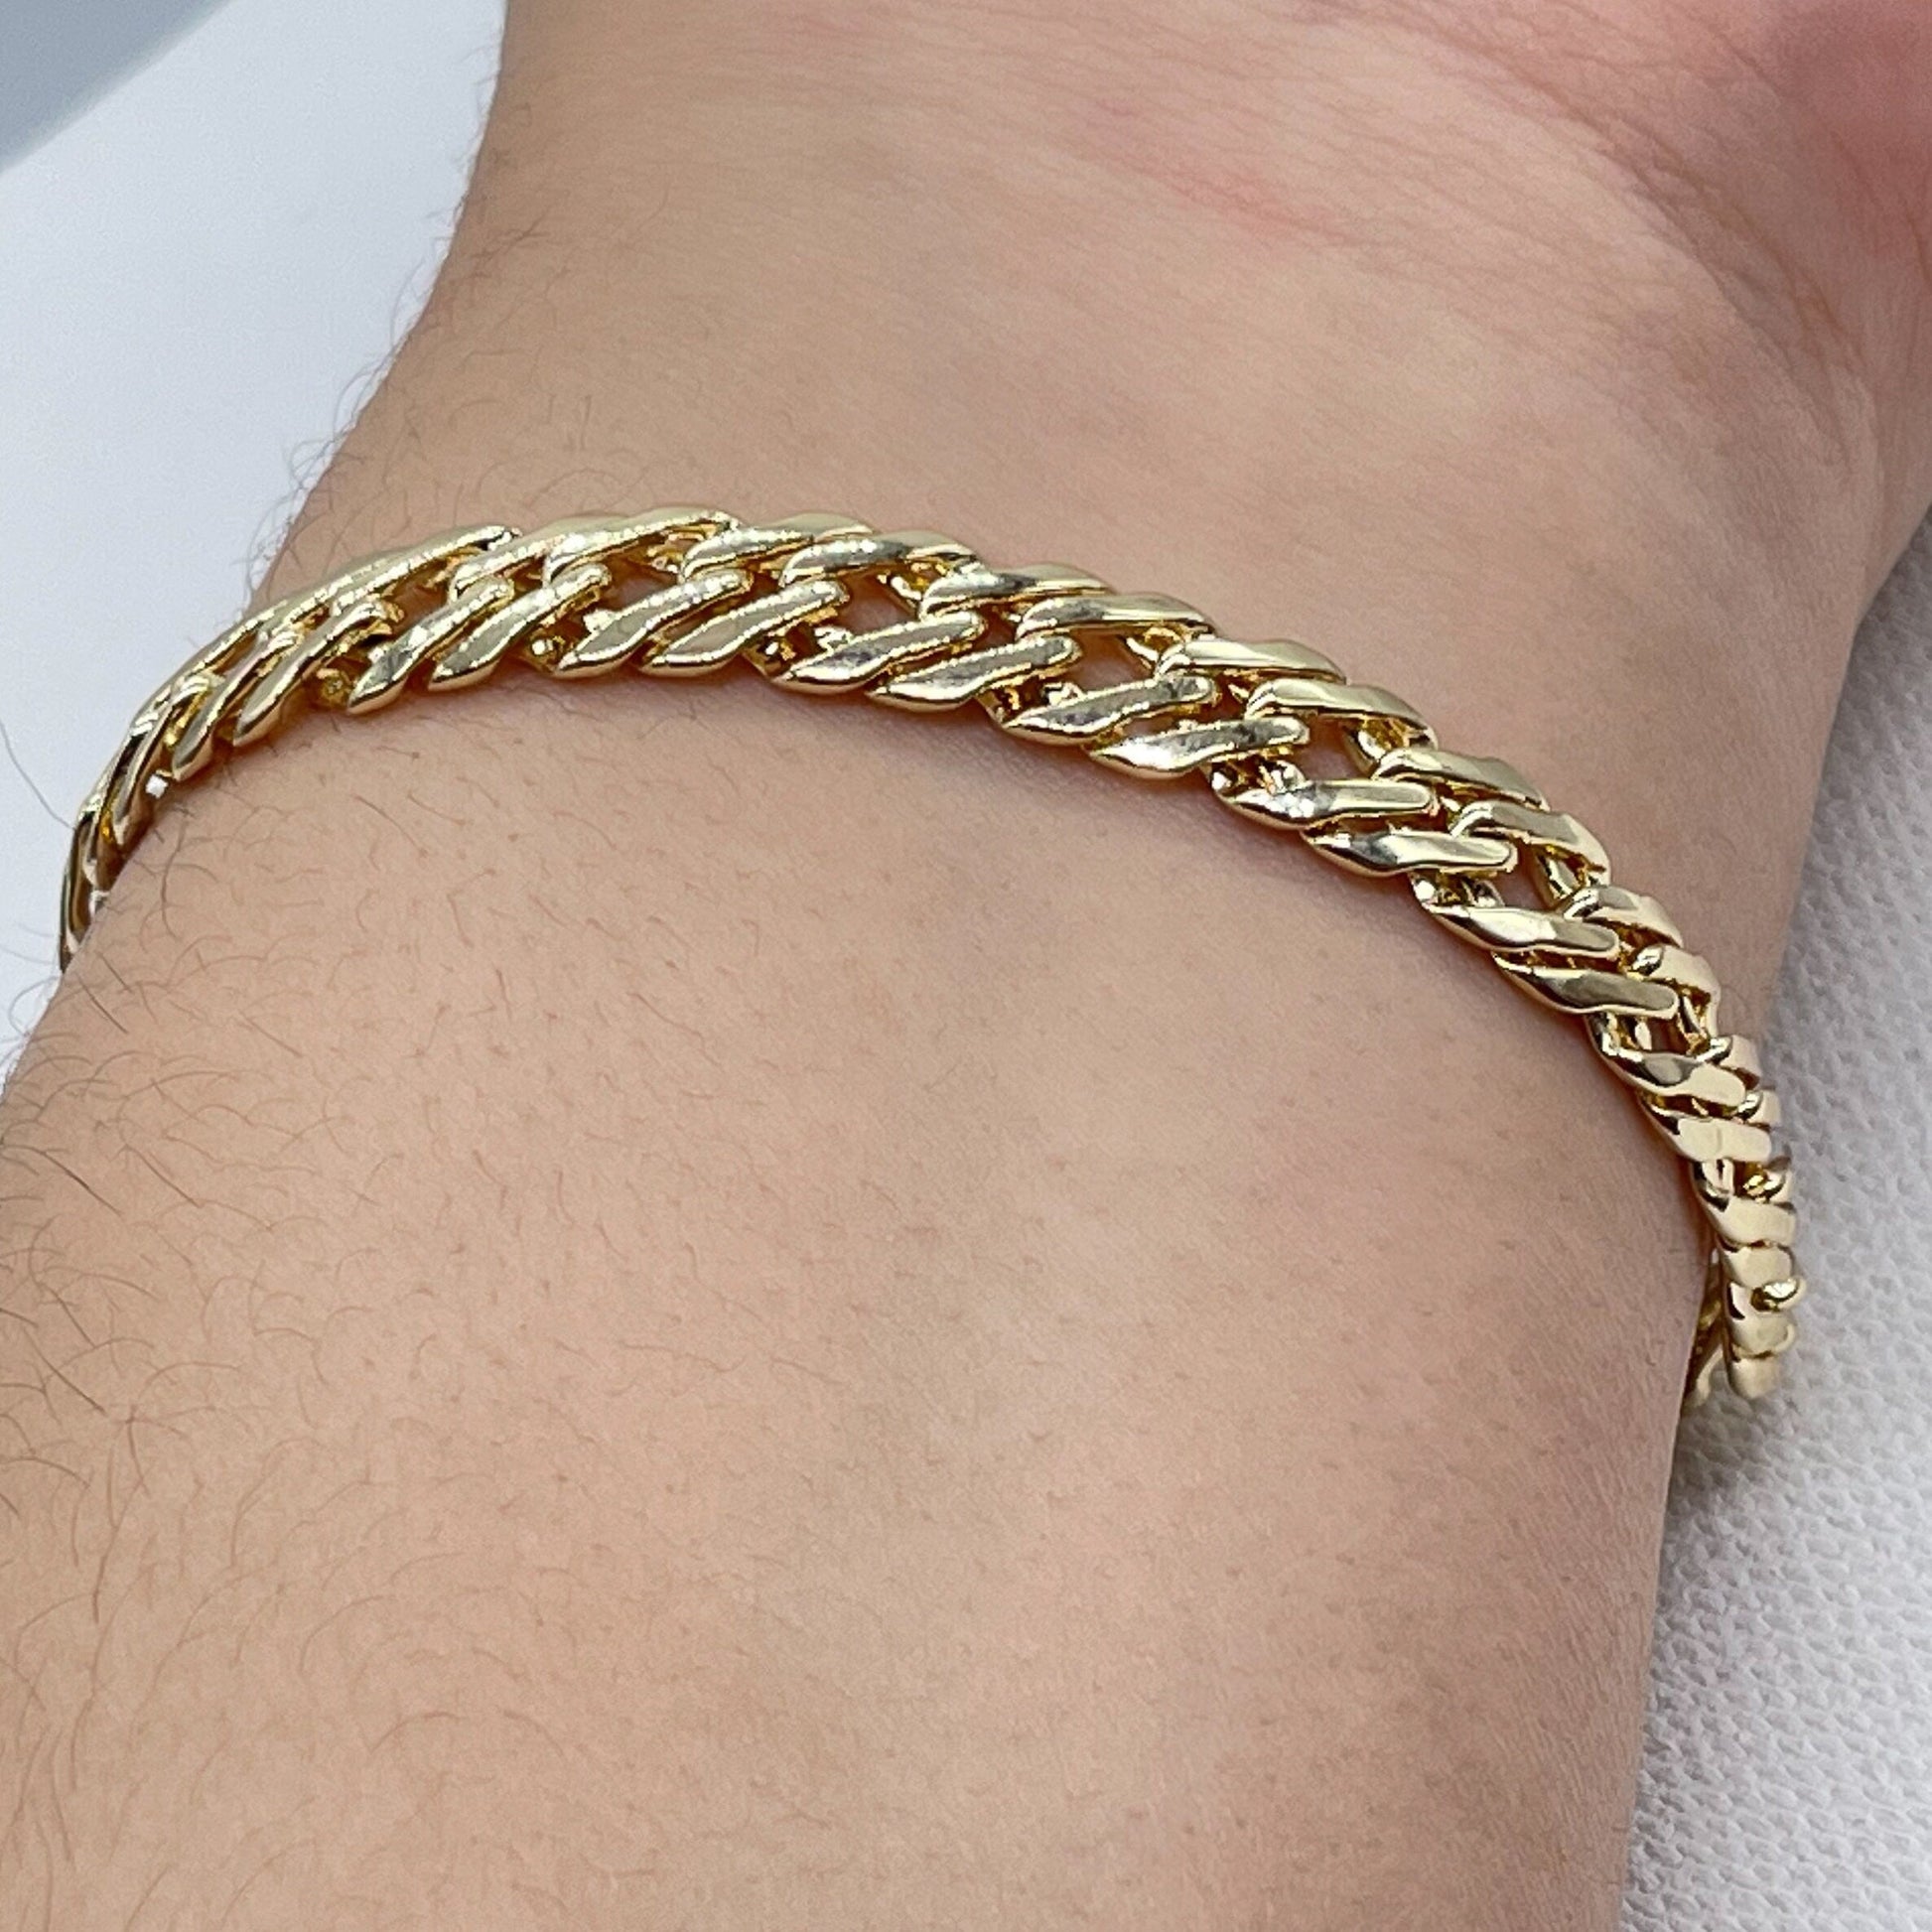 18k Gold Layered Double Cuban link bracelet In Available in Size 8